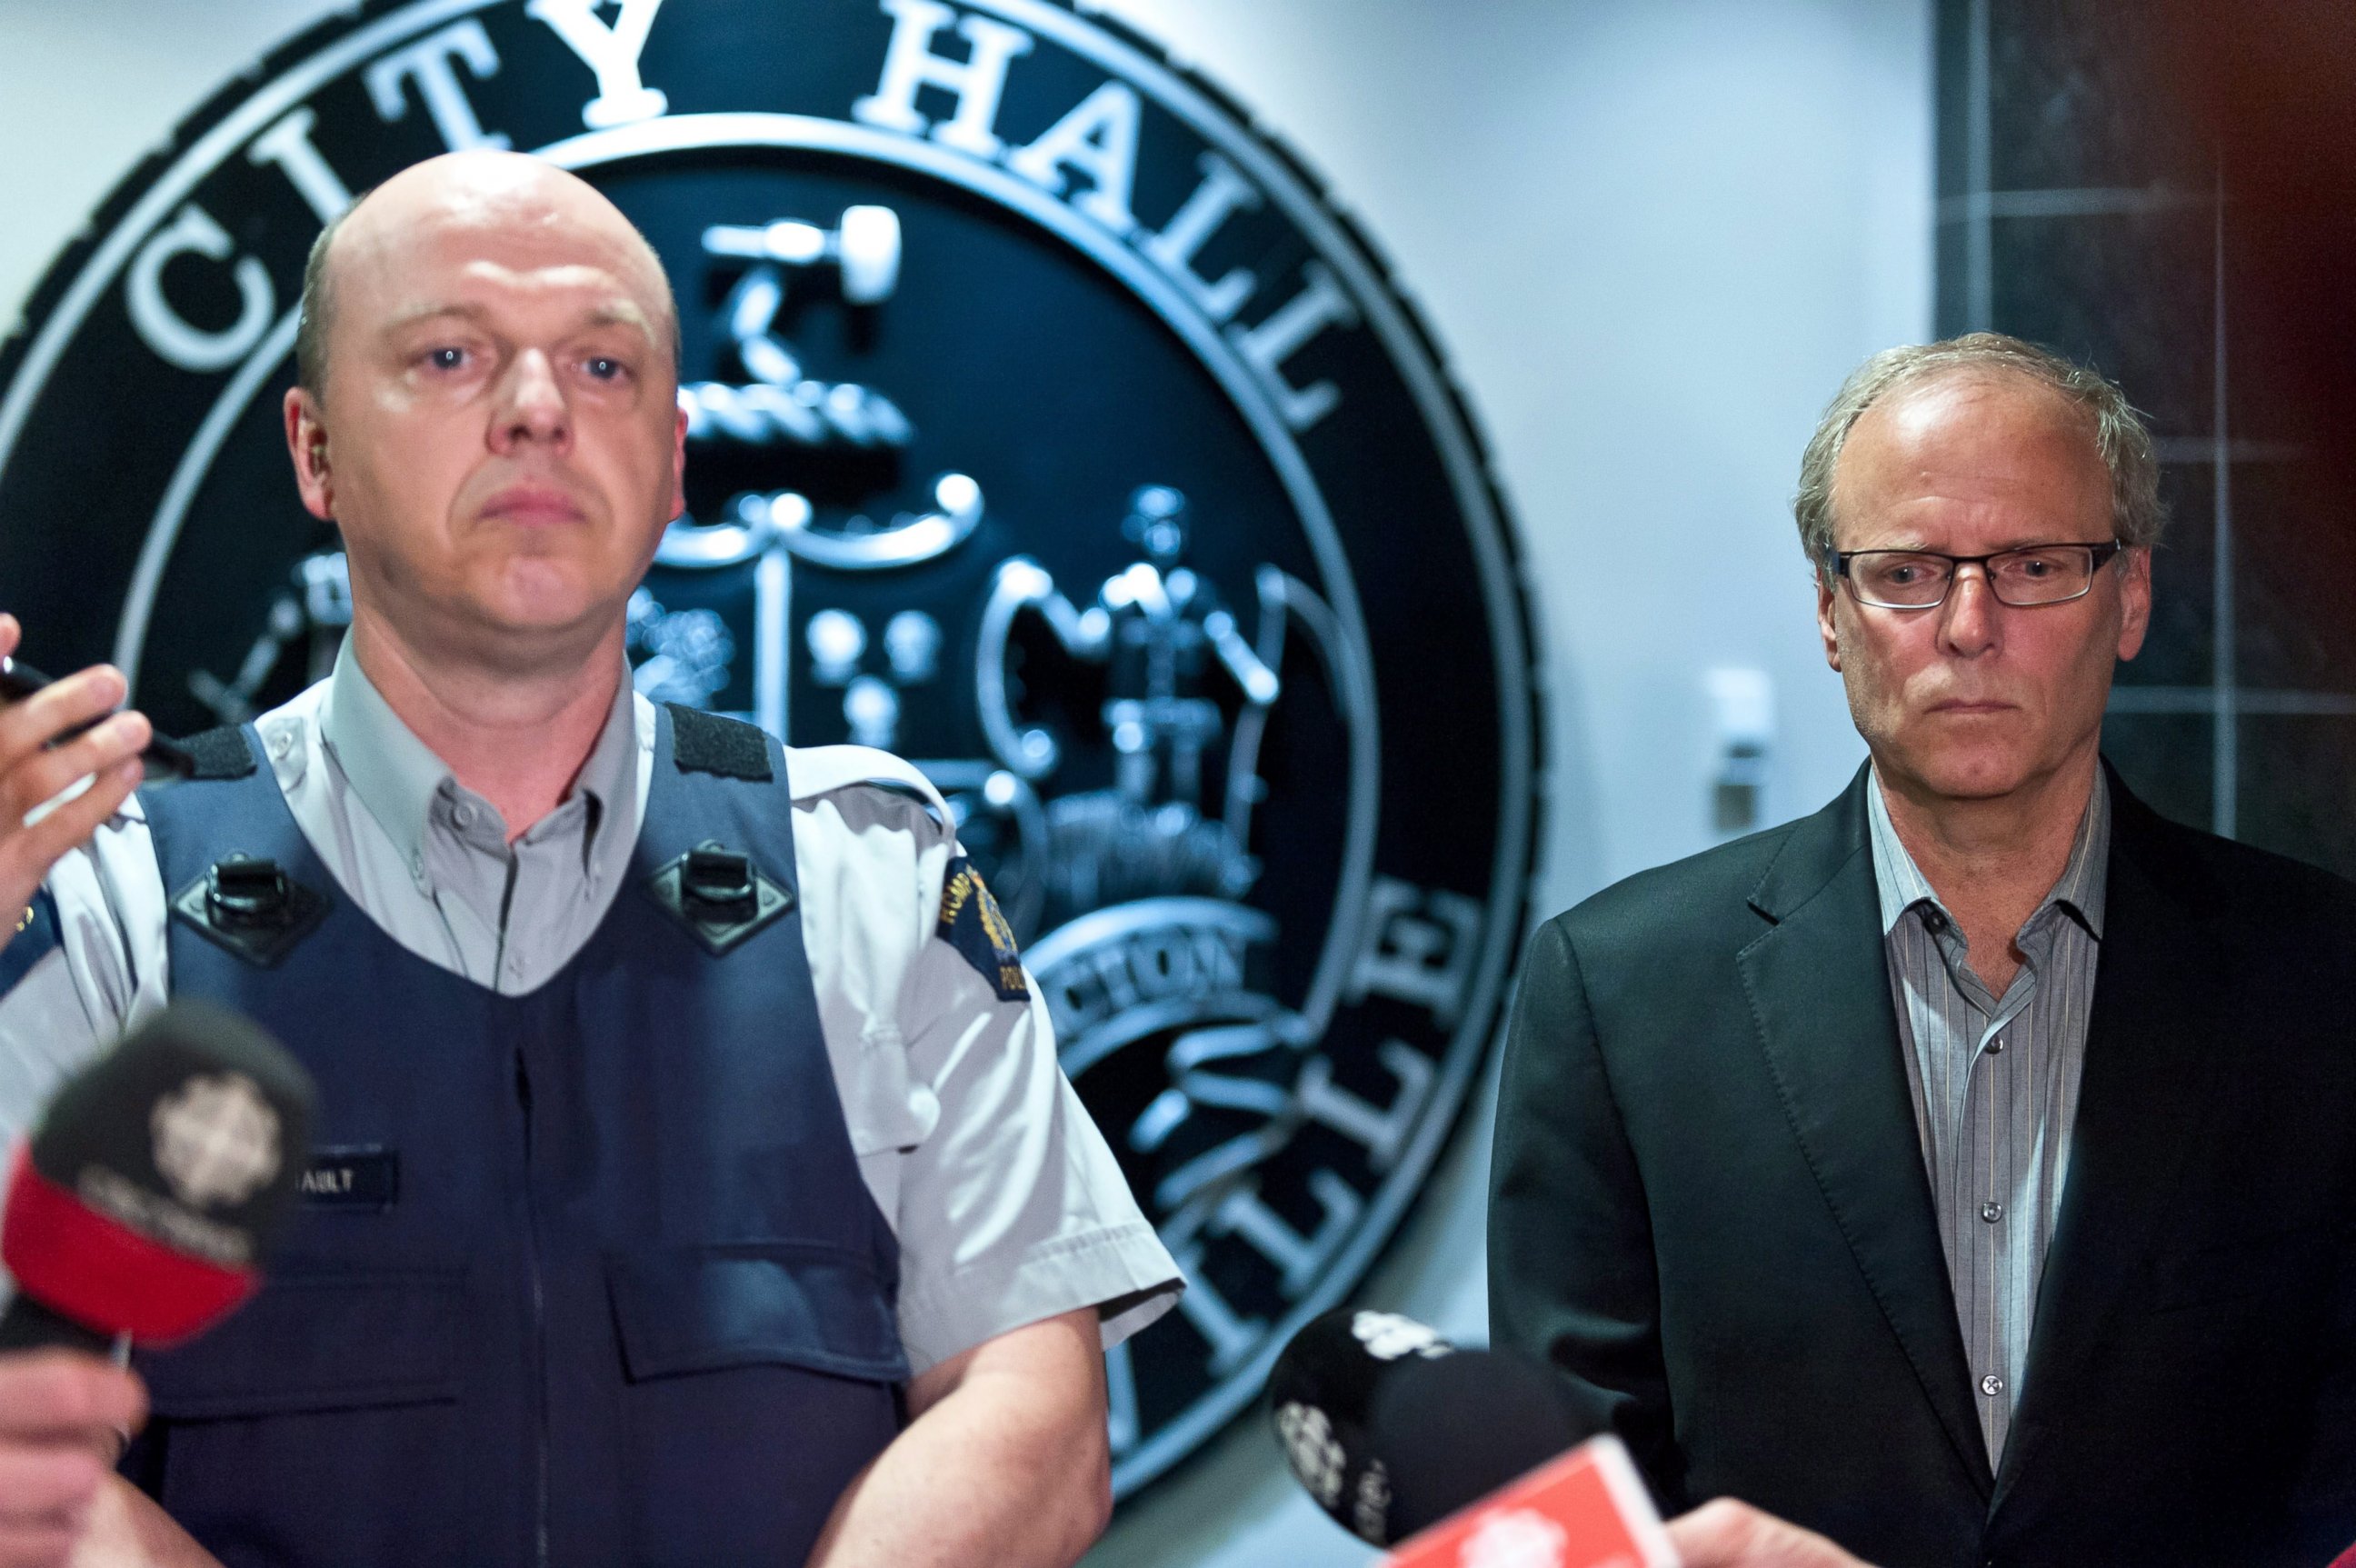 PHOTO: Royal Canadian Mounted Police officer Damien Theriault and Mayor George LeBlanc pause to collect themselves before addressing the media during a late night news conference at City Hall in Moncton,  New Brunswick, June 4, 2014.